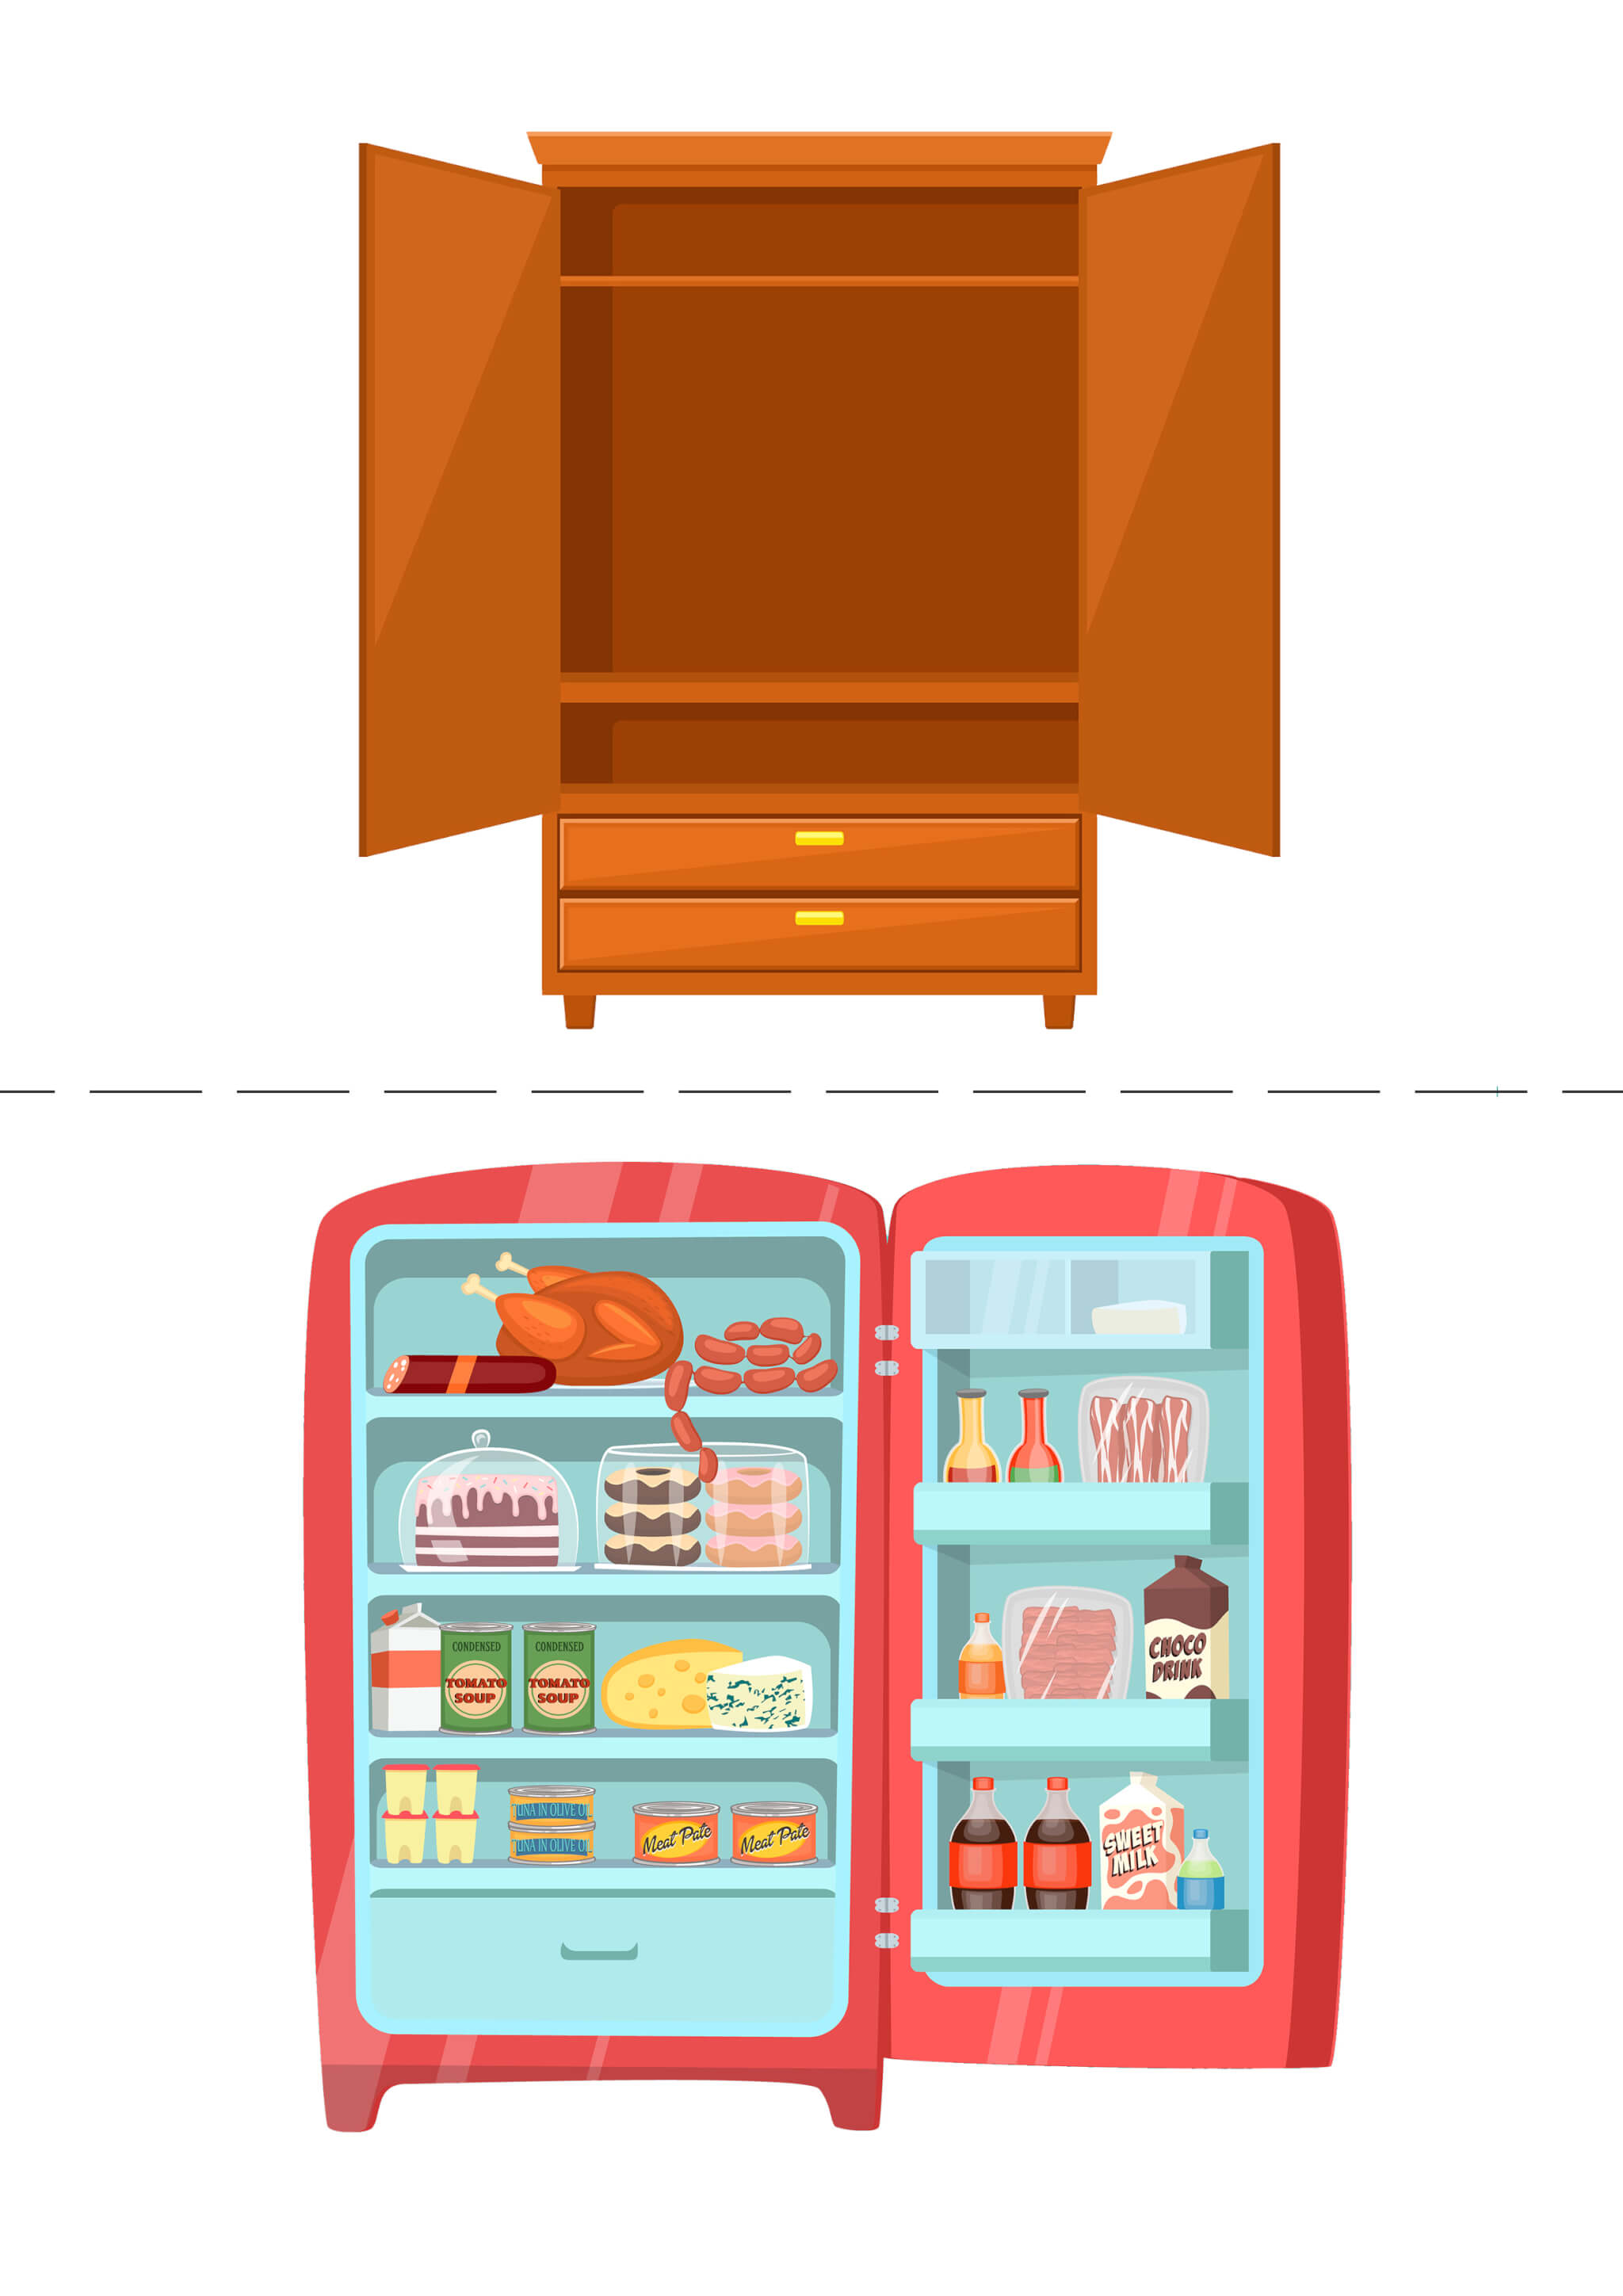 Food and Clothes Sorting Activity Sheet - Image 2